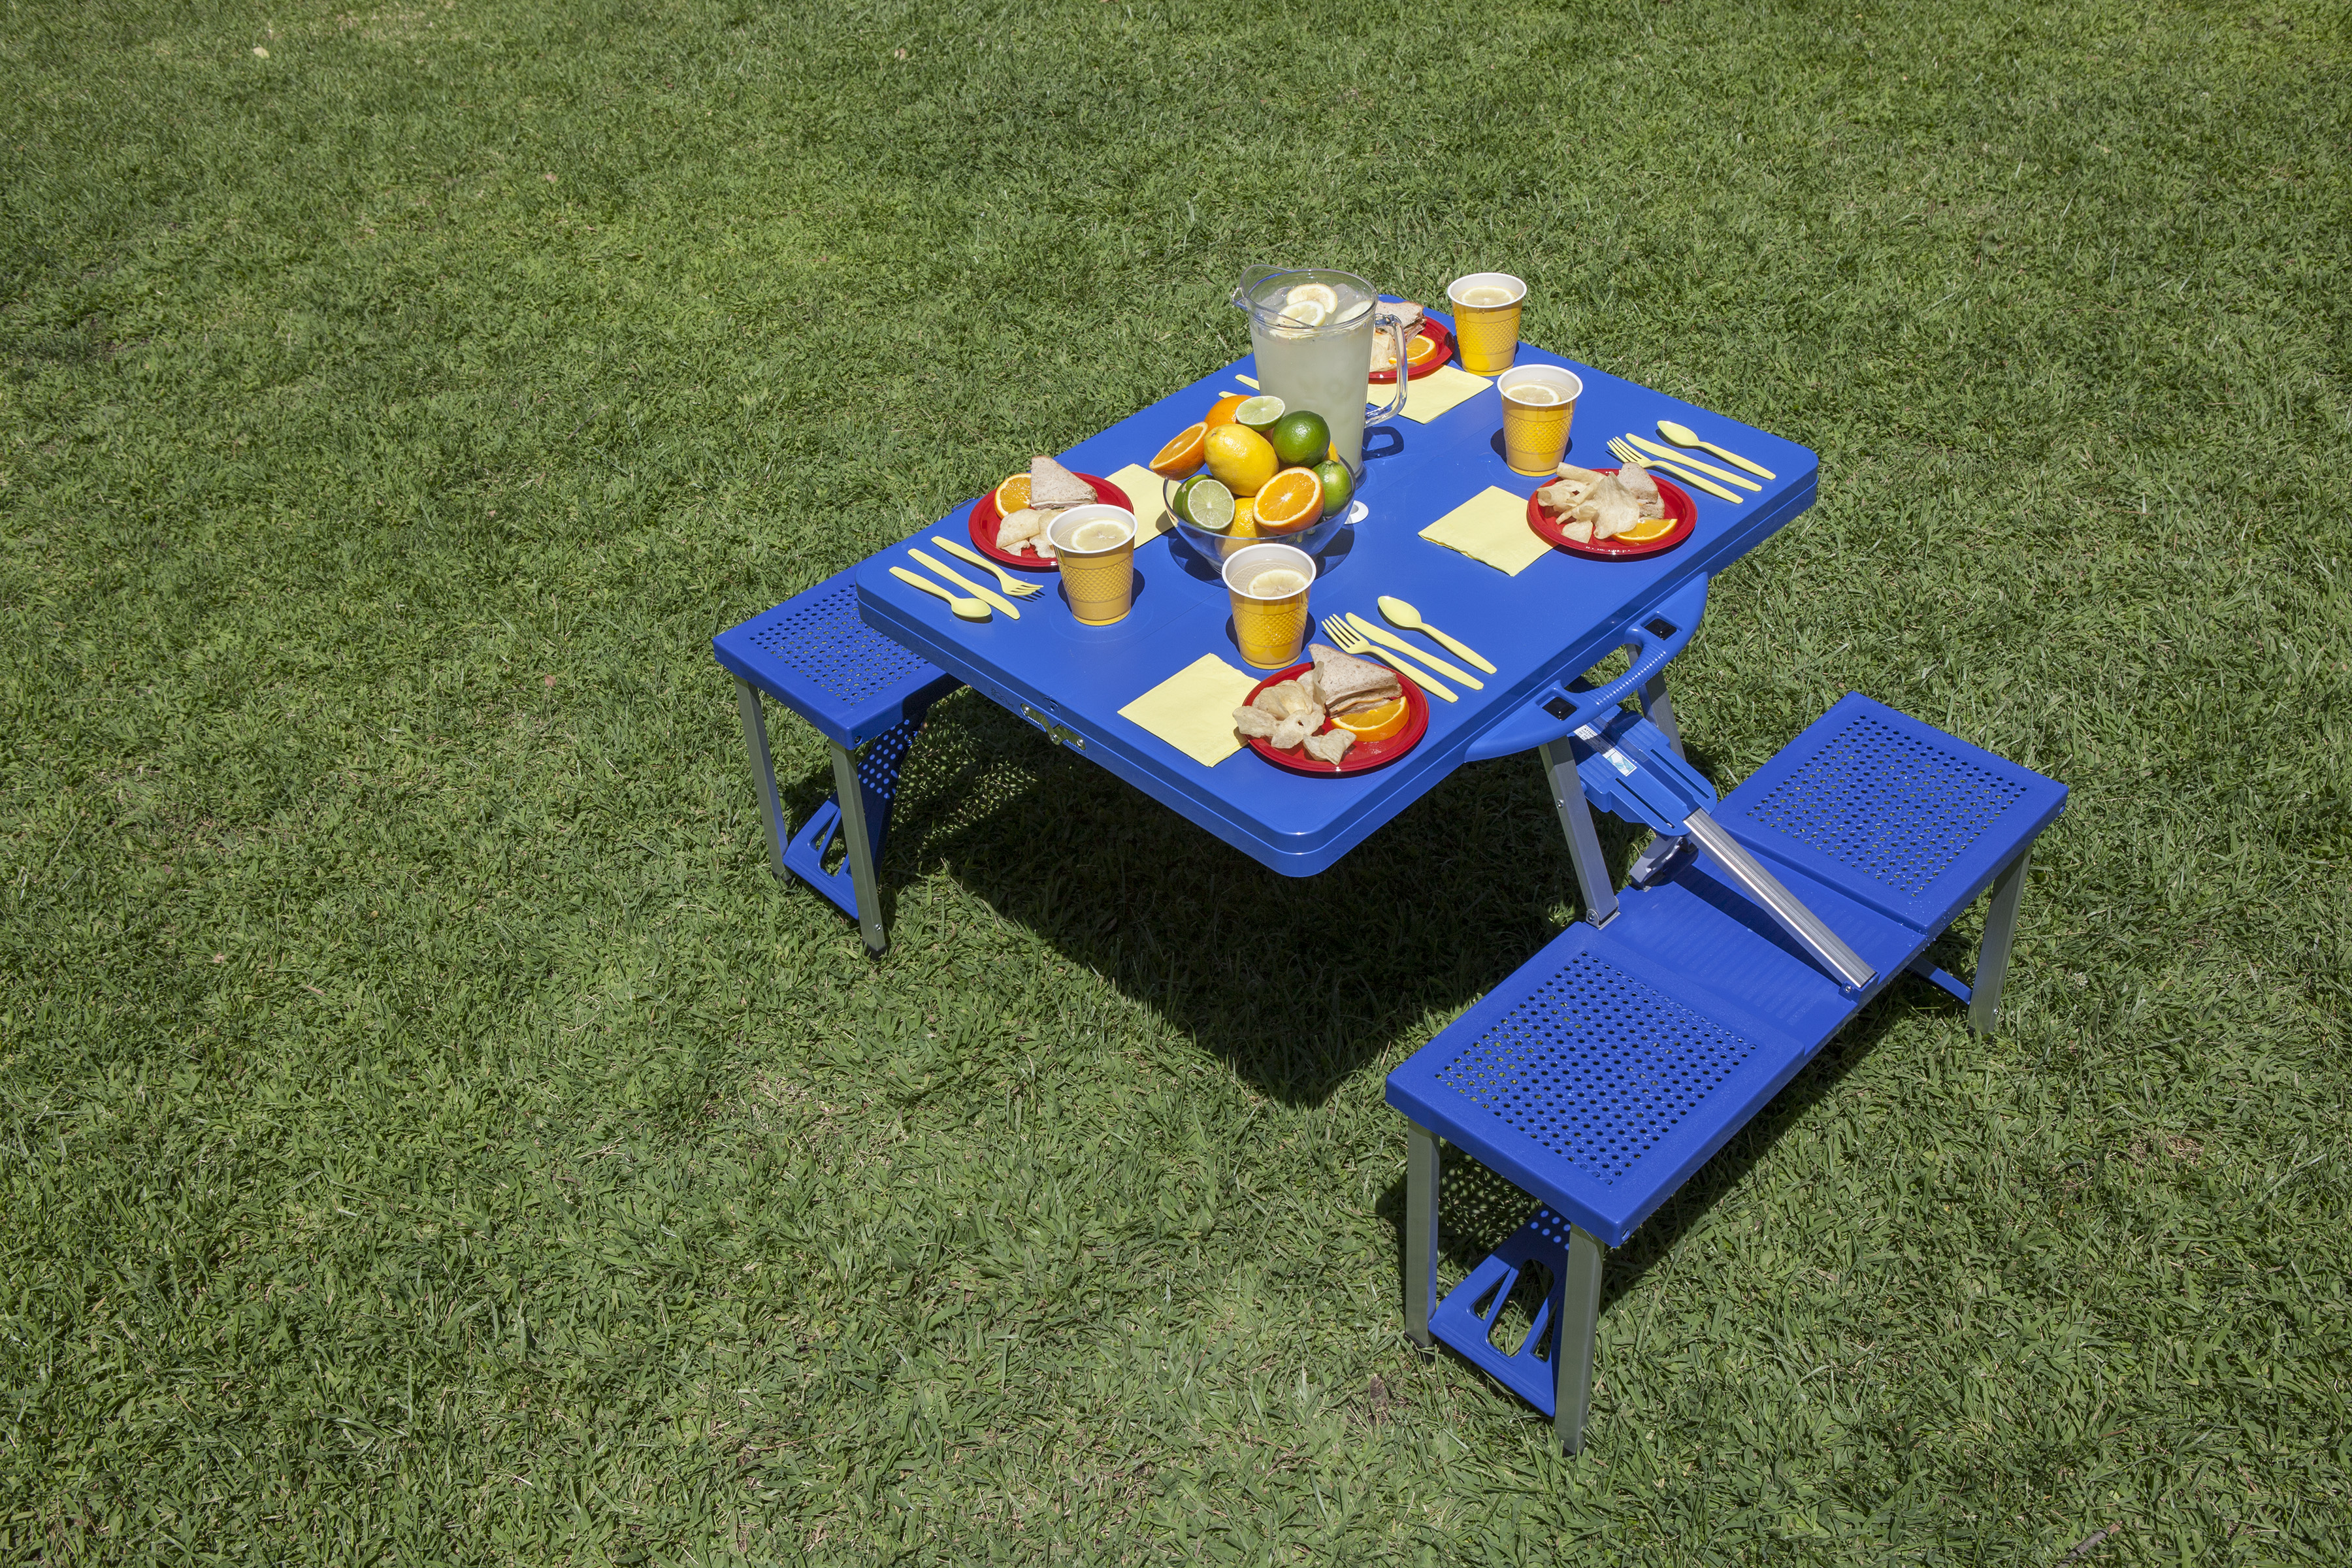 Michigan Wolverines - Picnic Table Portable Folding Table with Seats